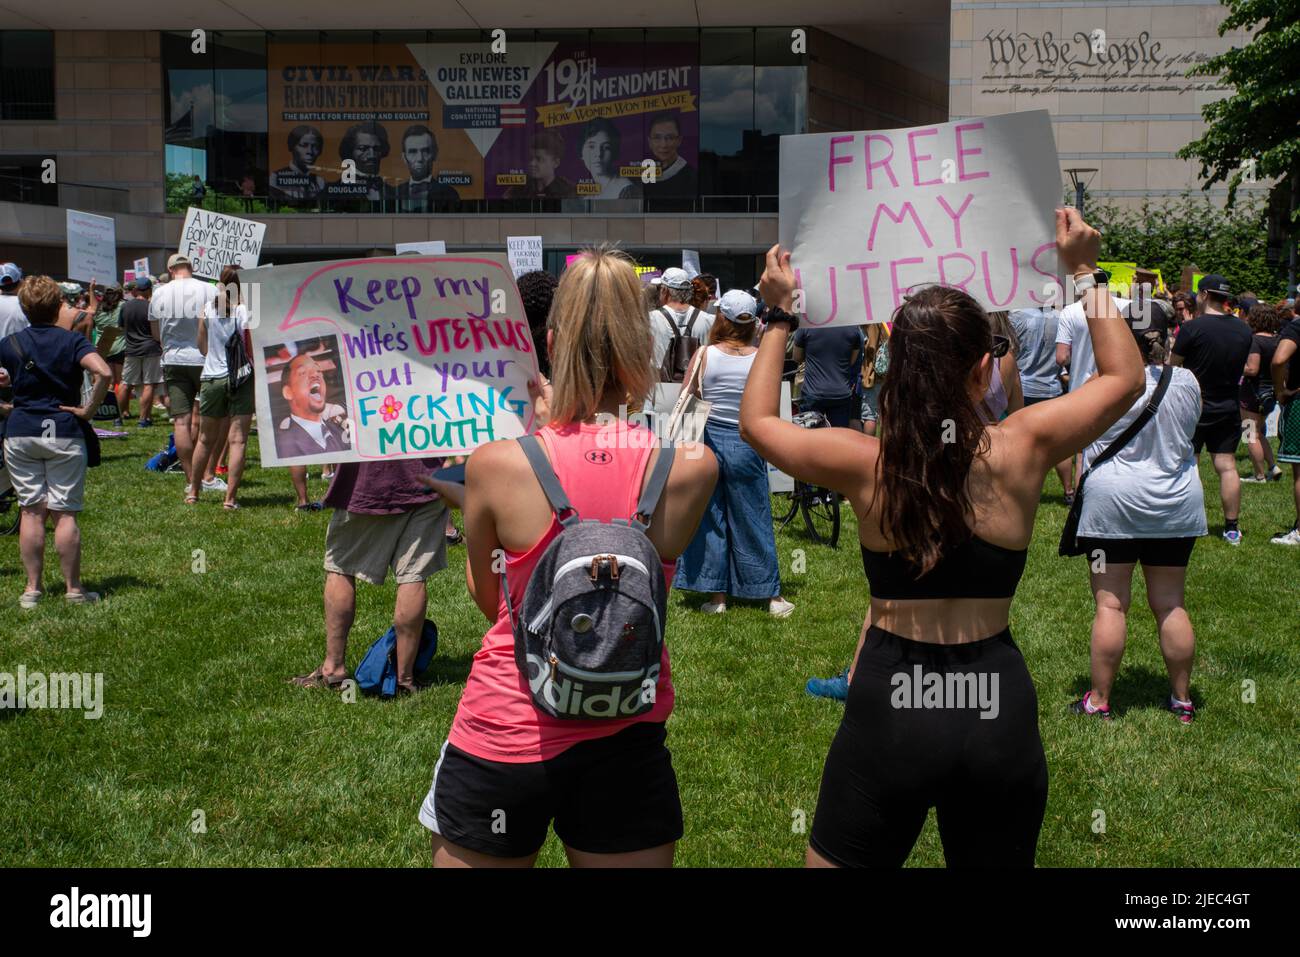 Two women hold feminist signs in crowd at pro-choice rally FREE MY UTERUS Stock Photo